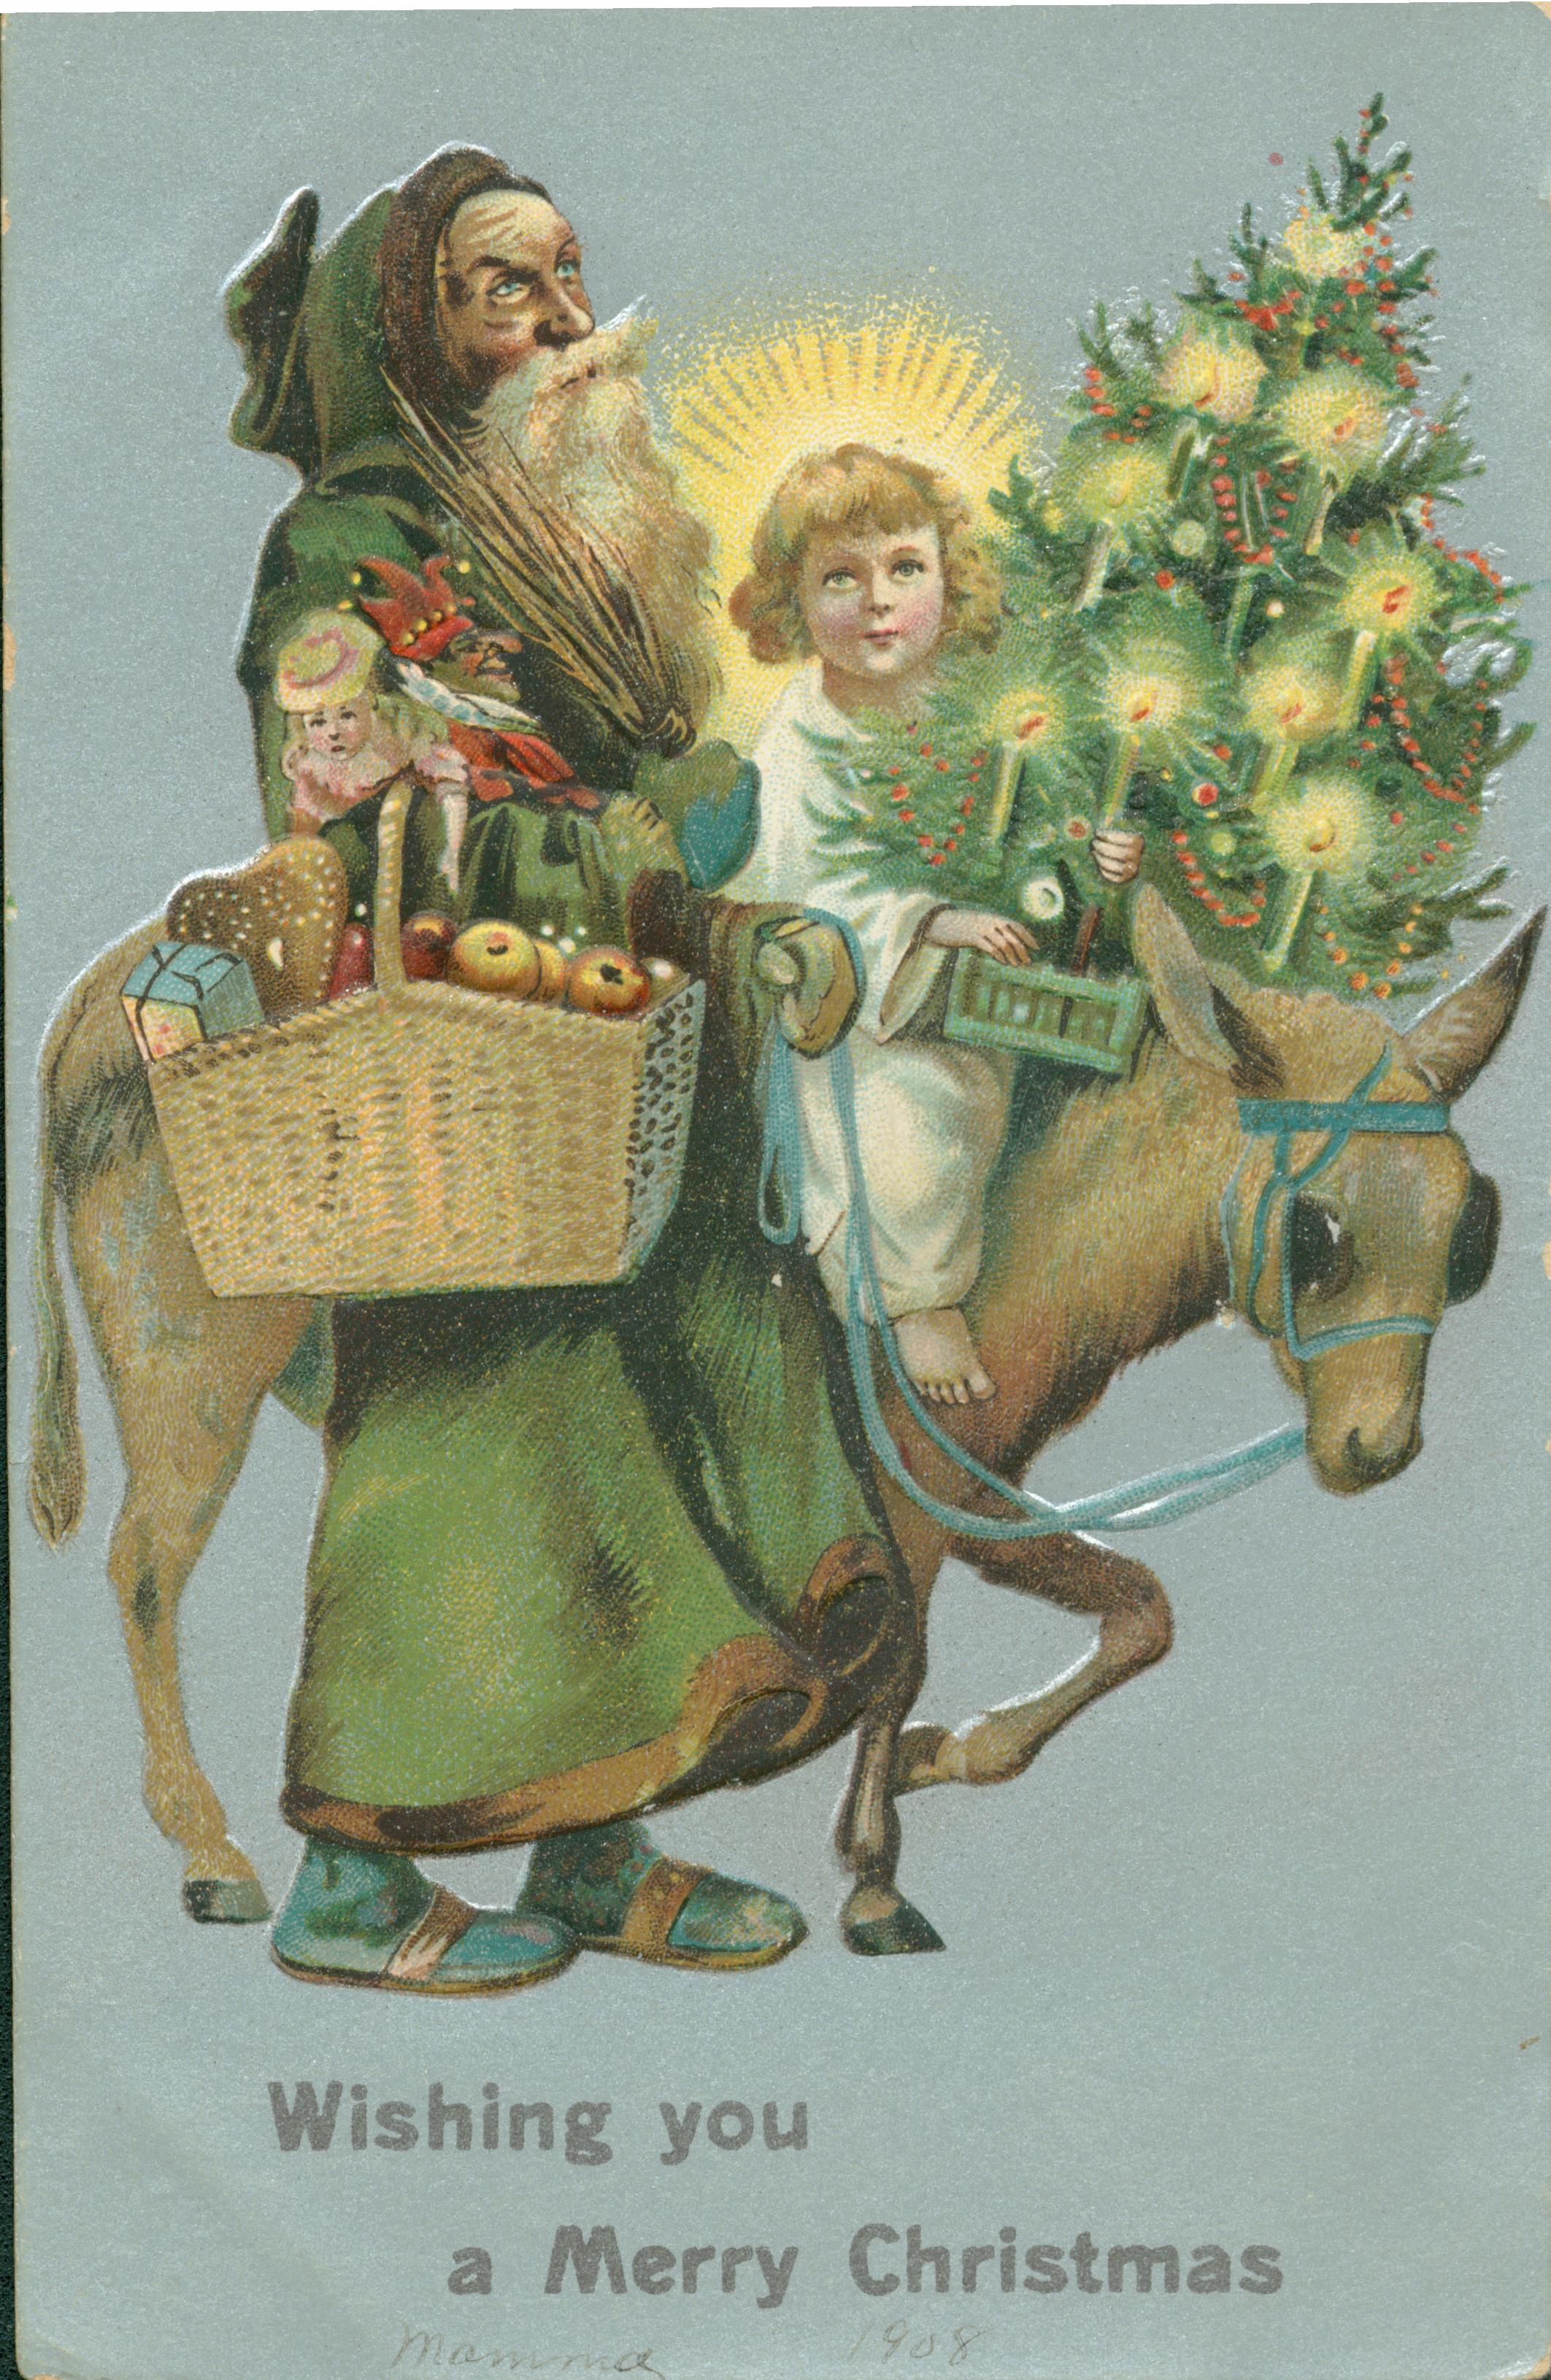 Shows a Santa Claus with gifts walking alongside a donkey bearing a child and a Christmas tree